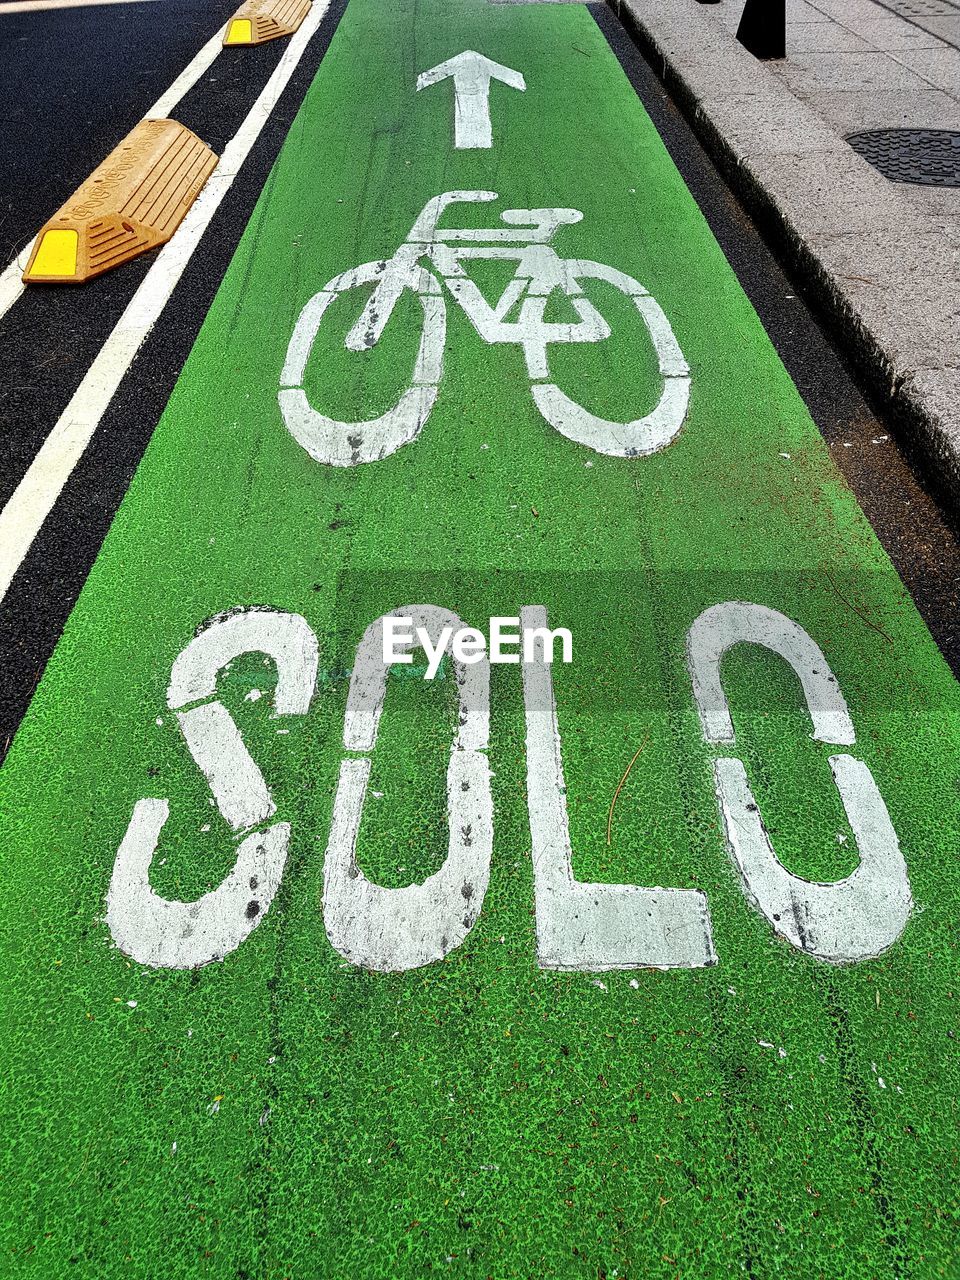 Bicycle lane sign and text on road